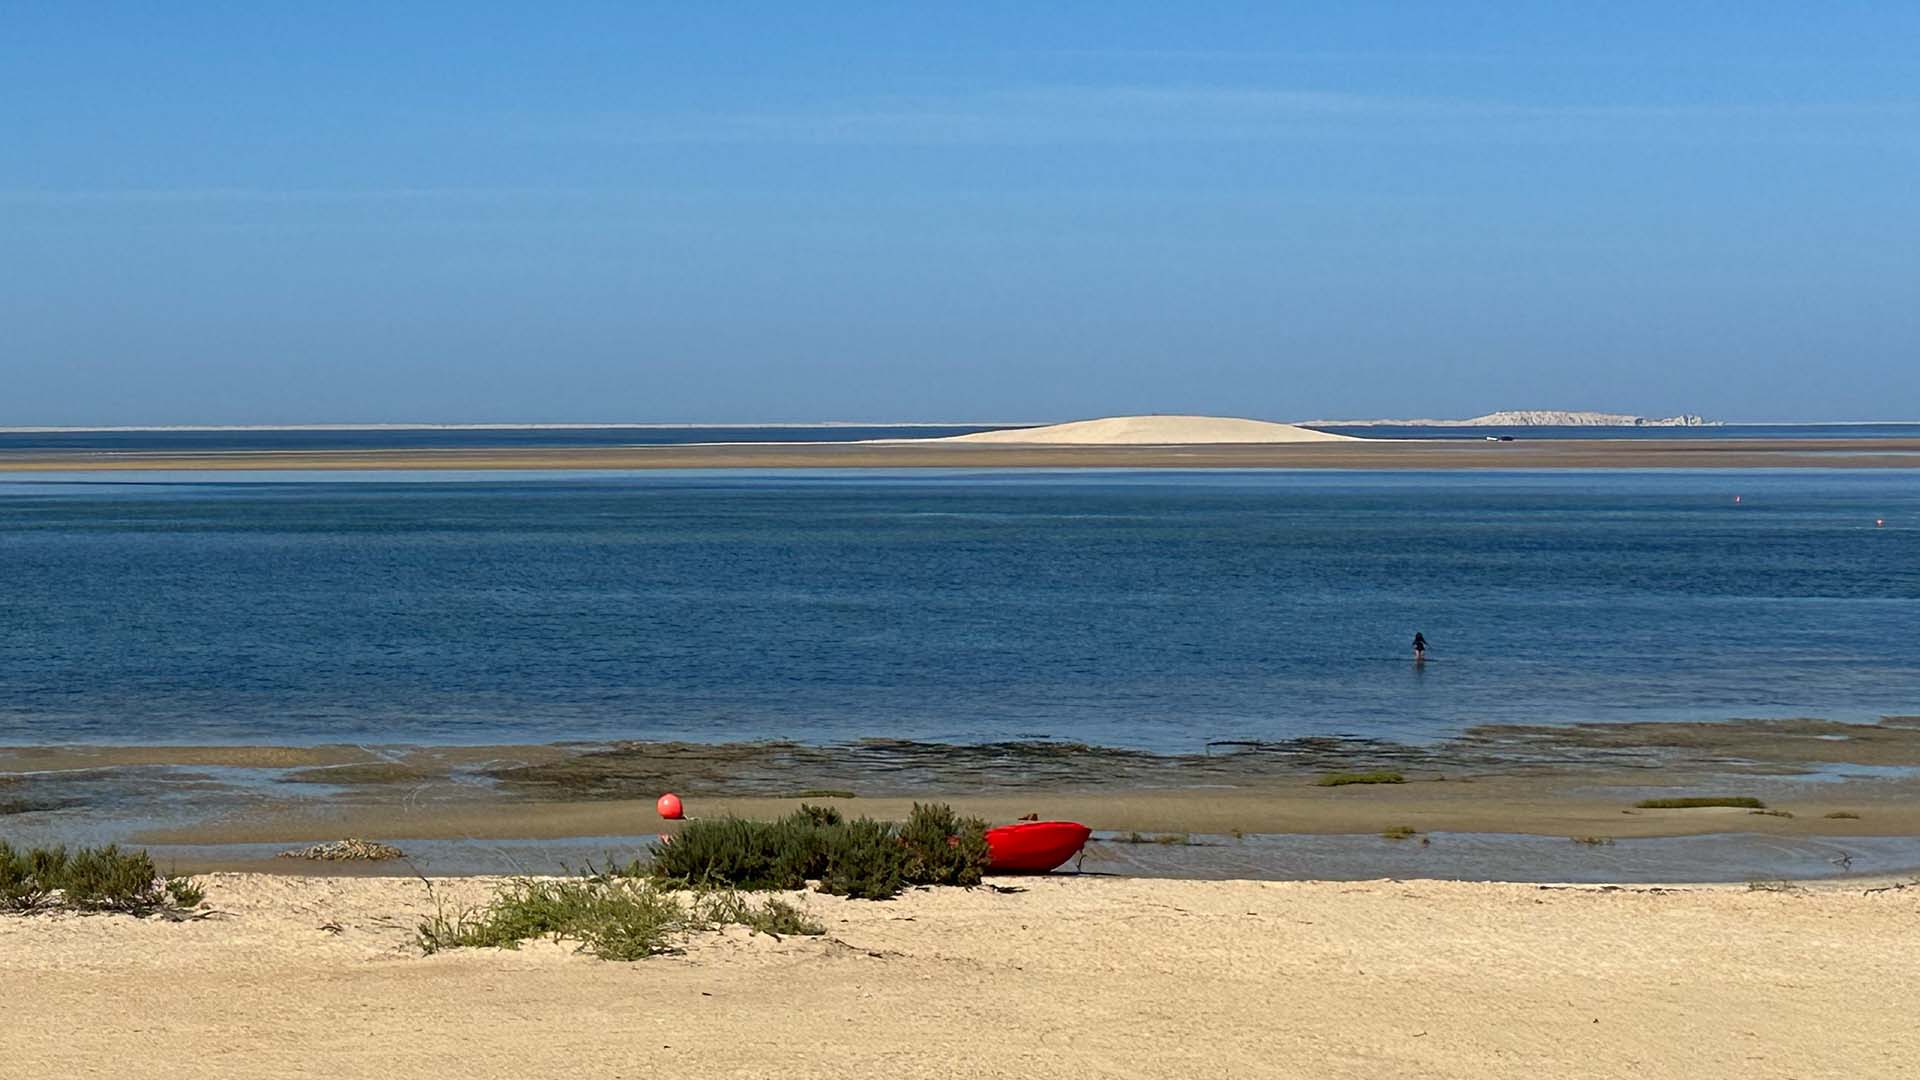 dakhla white dune with a red boat